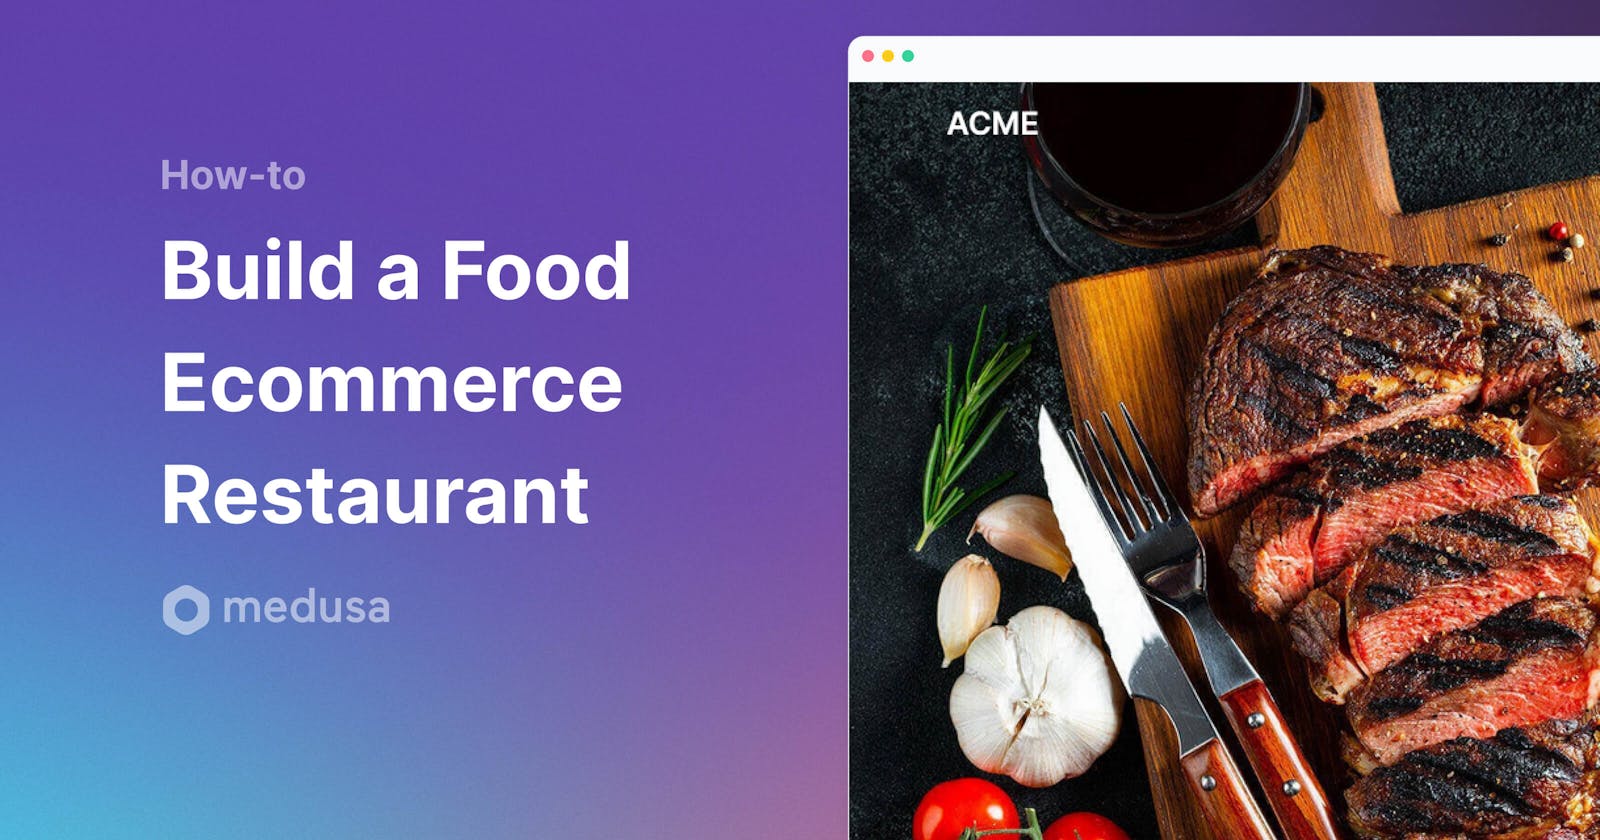 Simple steps to Build a Food Ecommerce Restaurant with Medusa, Next.js, and Paystack